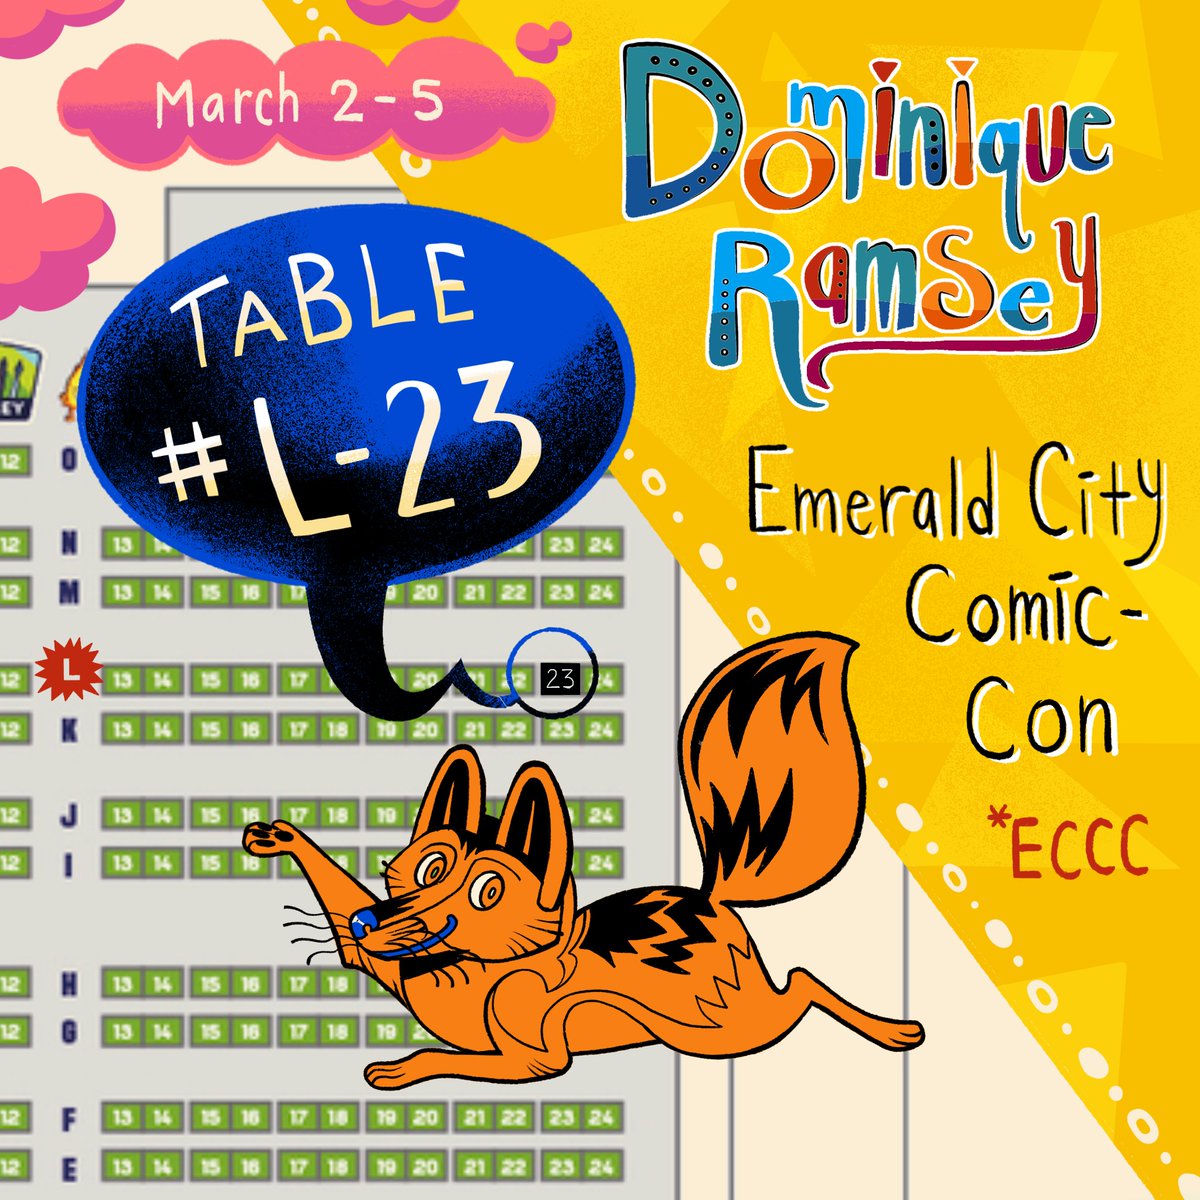 I will be tabling at Emerald City Comic Con next month in the artist alley! 
Come find me at table L-23✨💚 